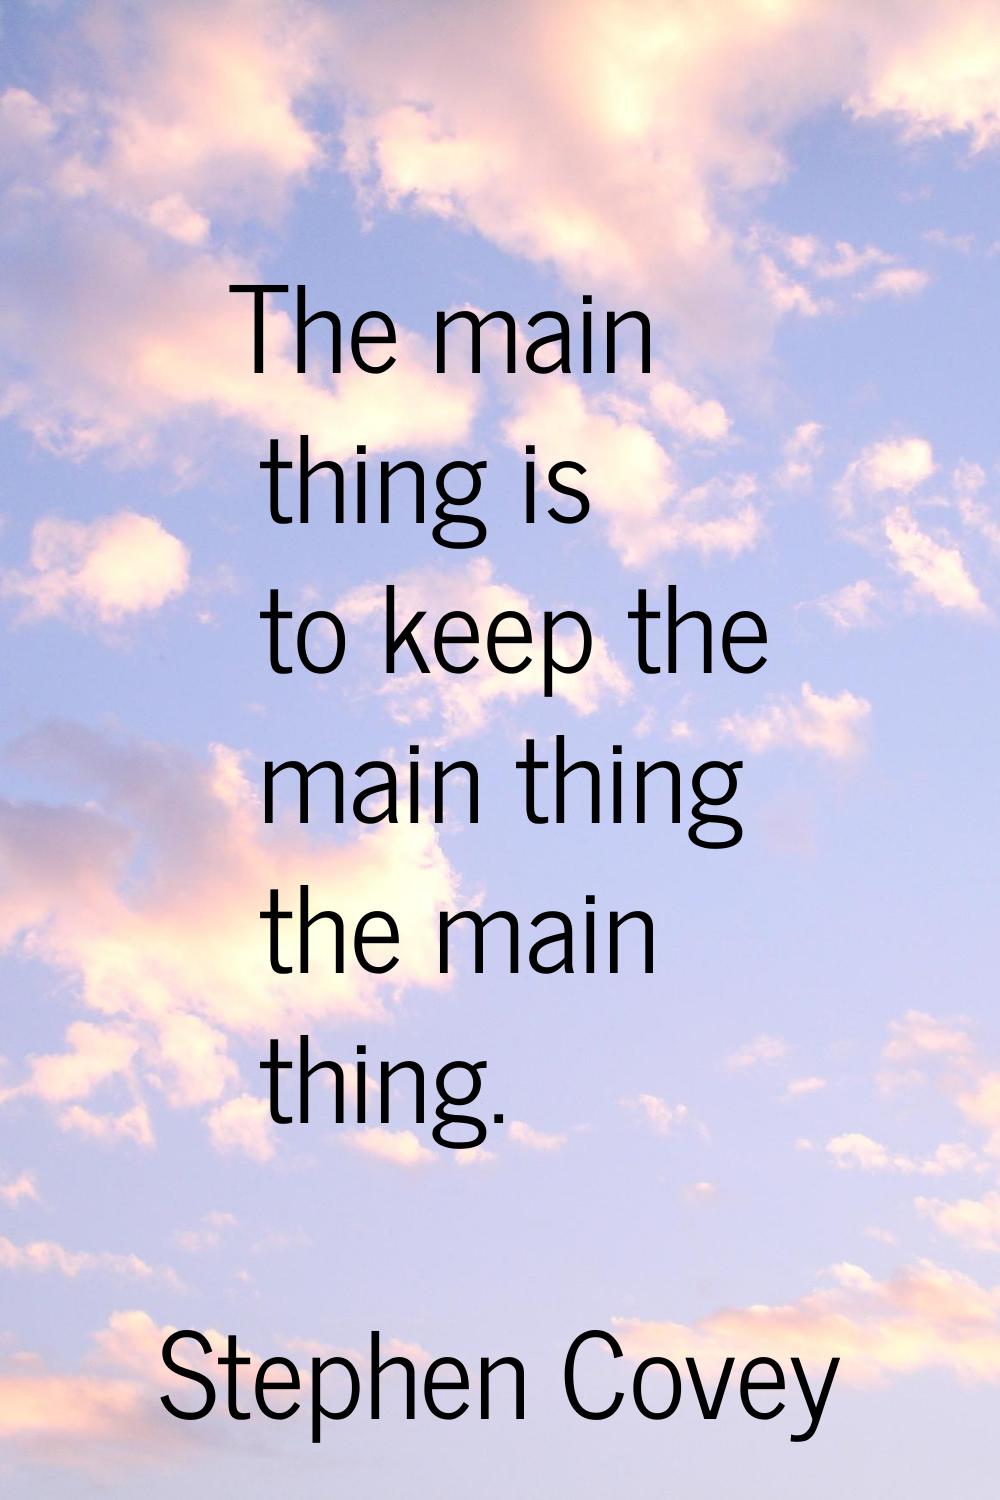 The main thing is to keep the main thing the main thing.